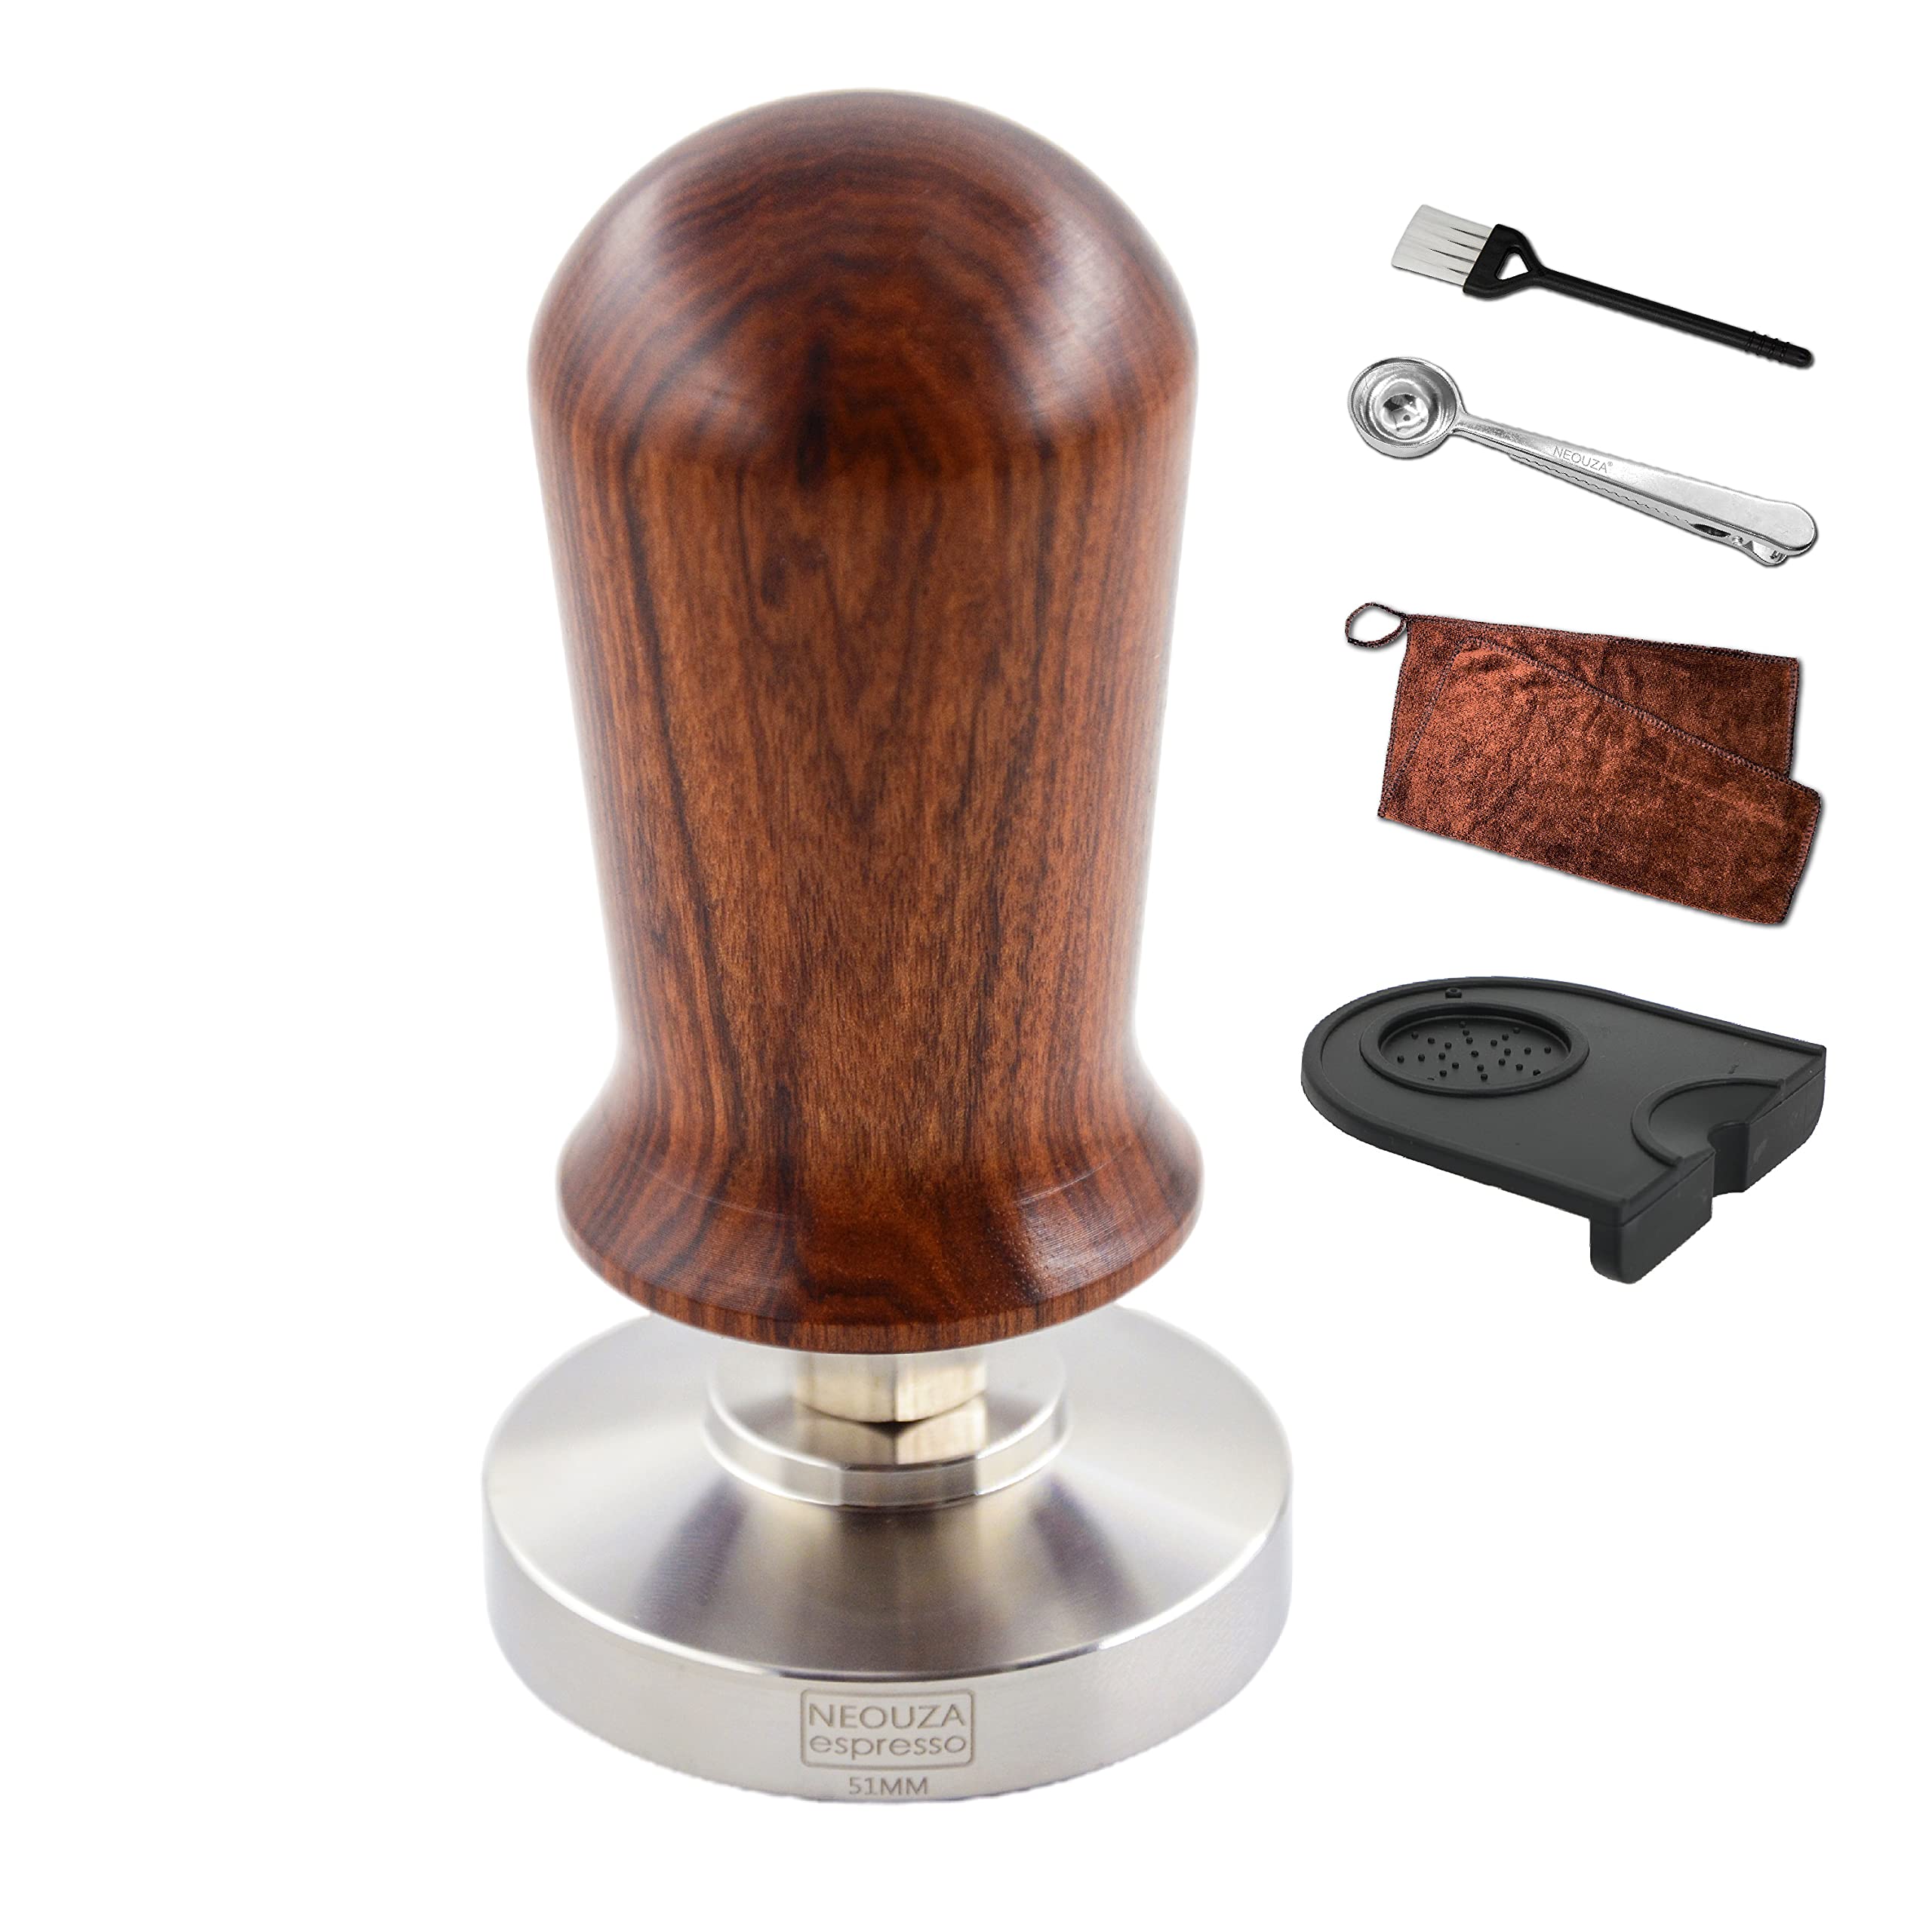 51mm Calibrated Espresso Tamper with Wooden Handle and Spring Loaded Flat